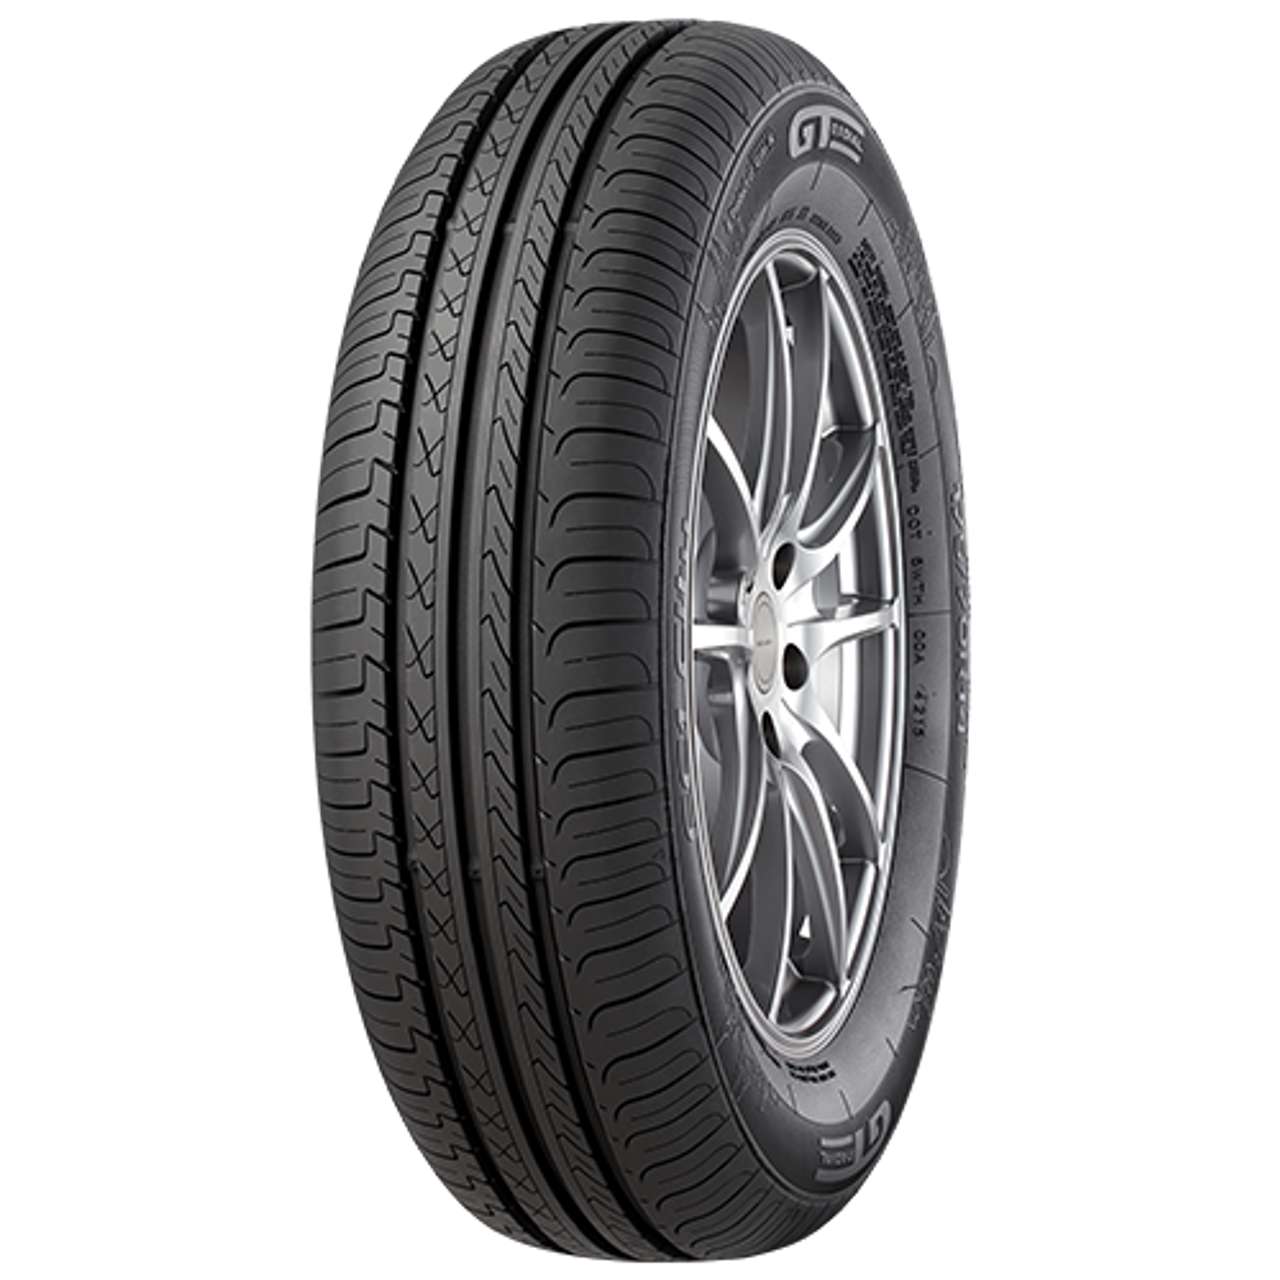 GT-RADIAL FE1 CITY 195/70R14 91H BSW